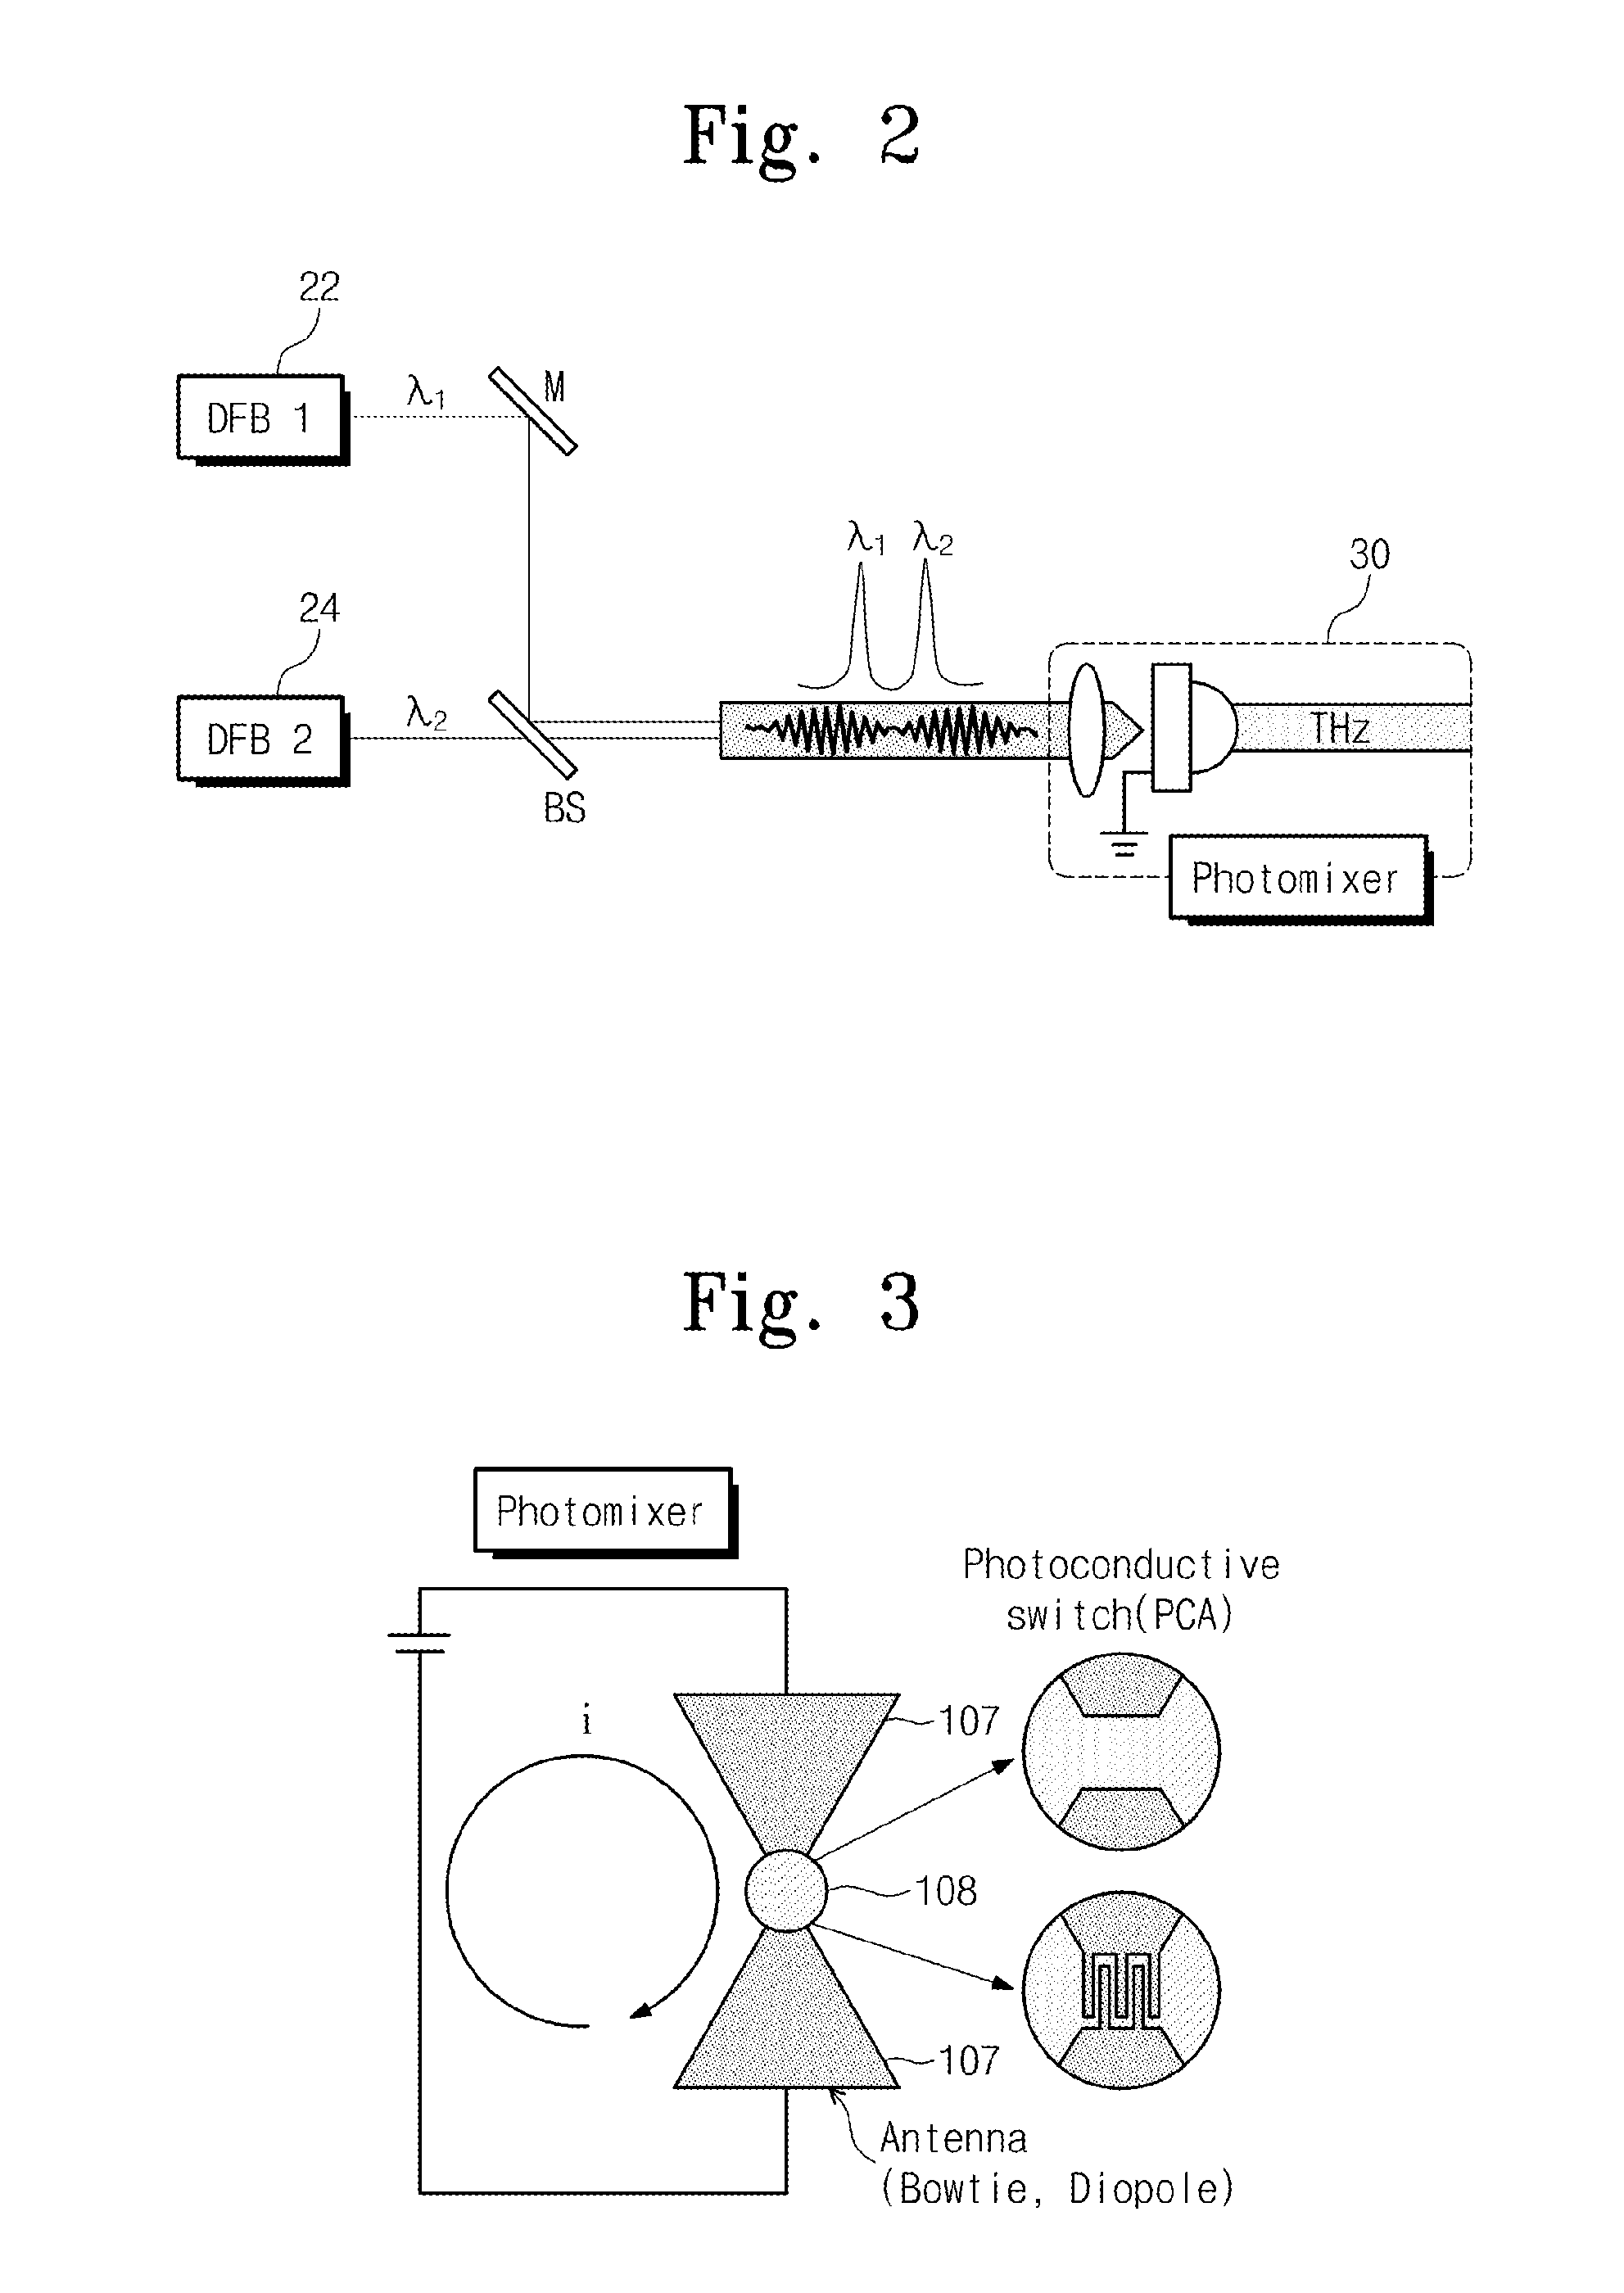 Wide area array type photonic crystal photomixer for generating and detecting broadband terahertz wave